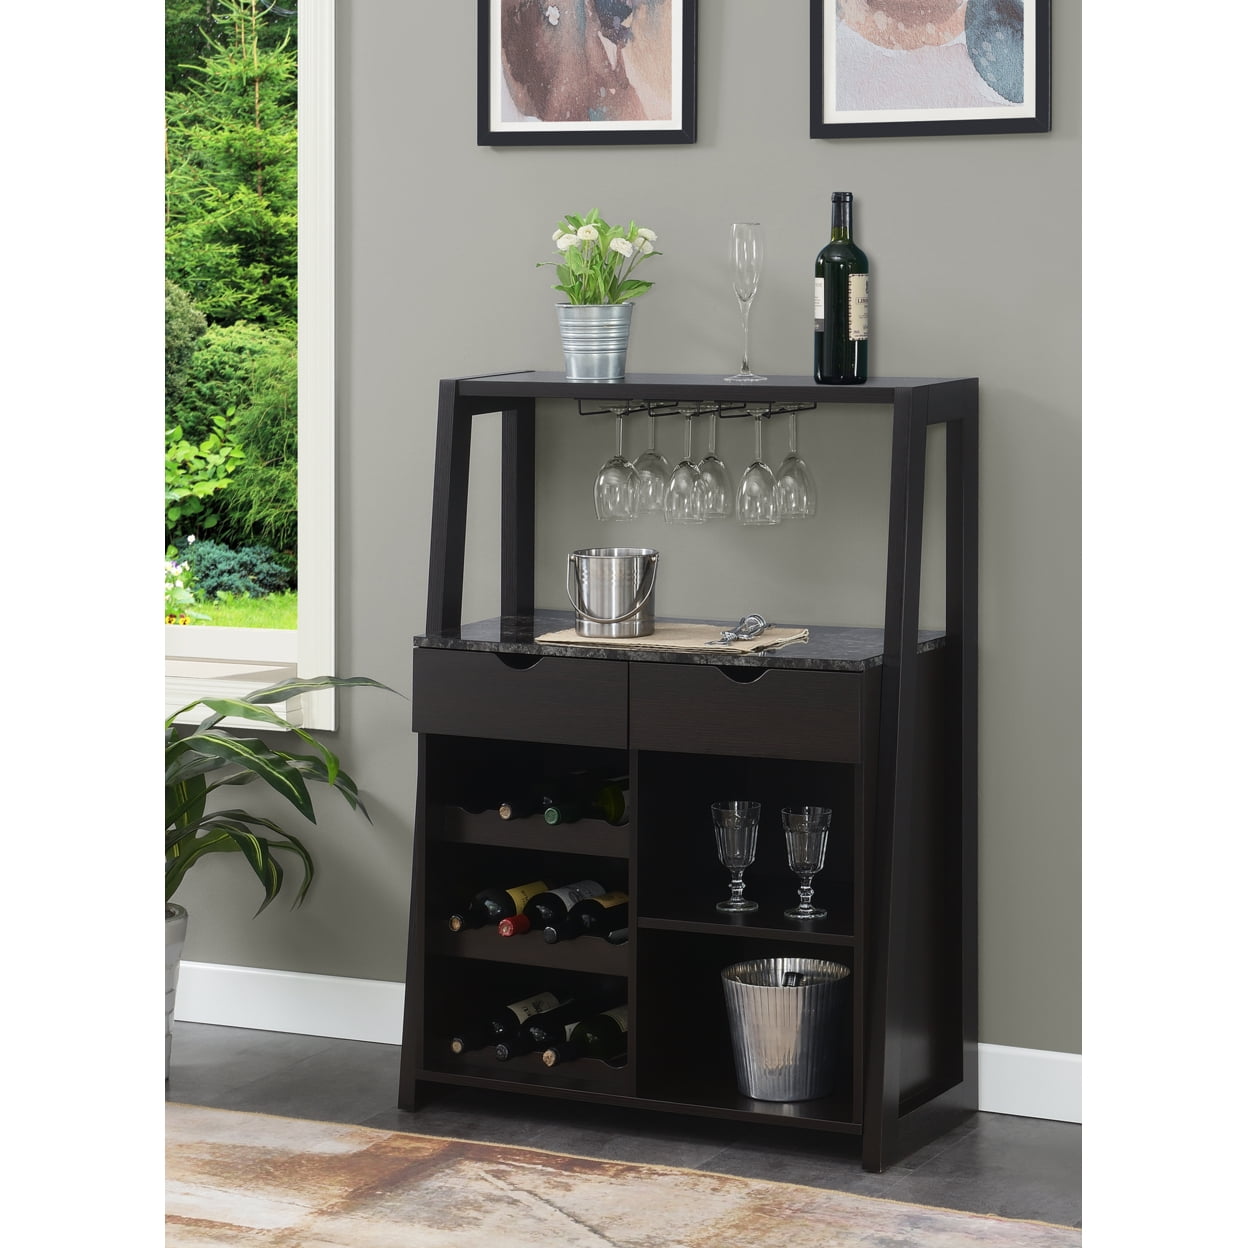 Picture of Convenience Concepts 121325BLMES Uptown Wine Bar with Espresso - Cabinet, Wood - 33.5 x 15.5 x 45.25 in.